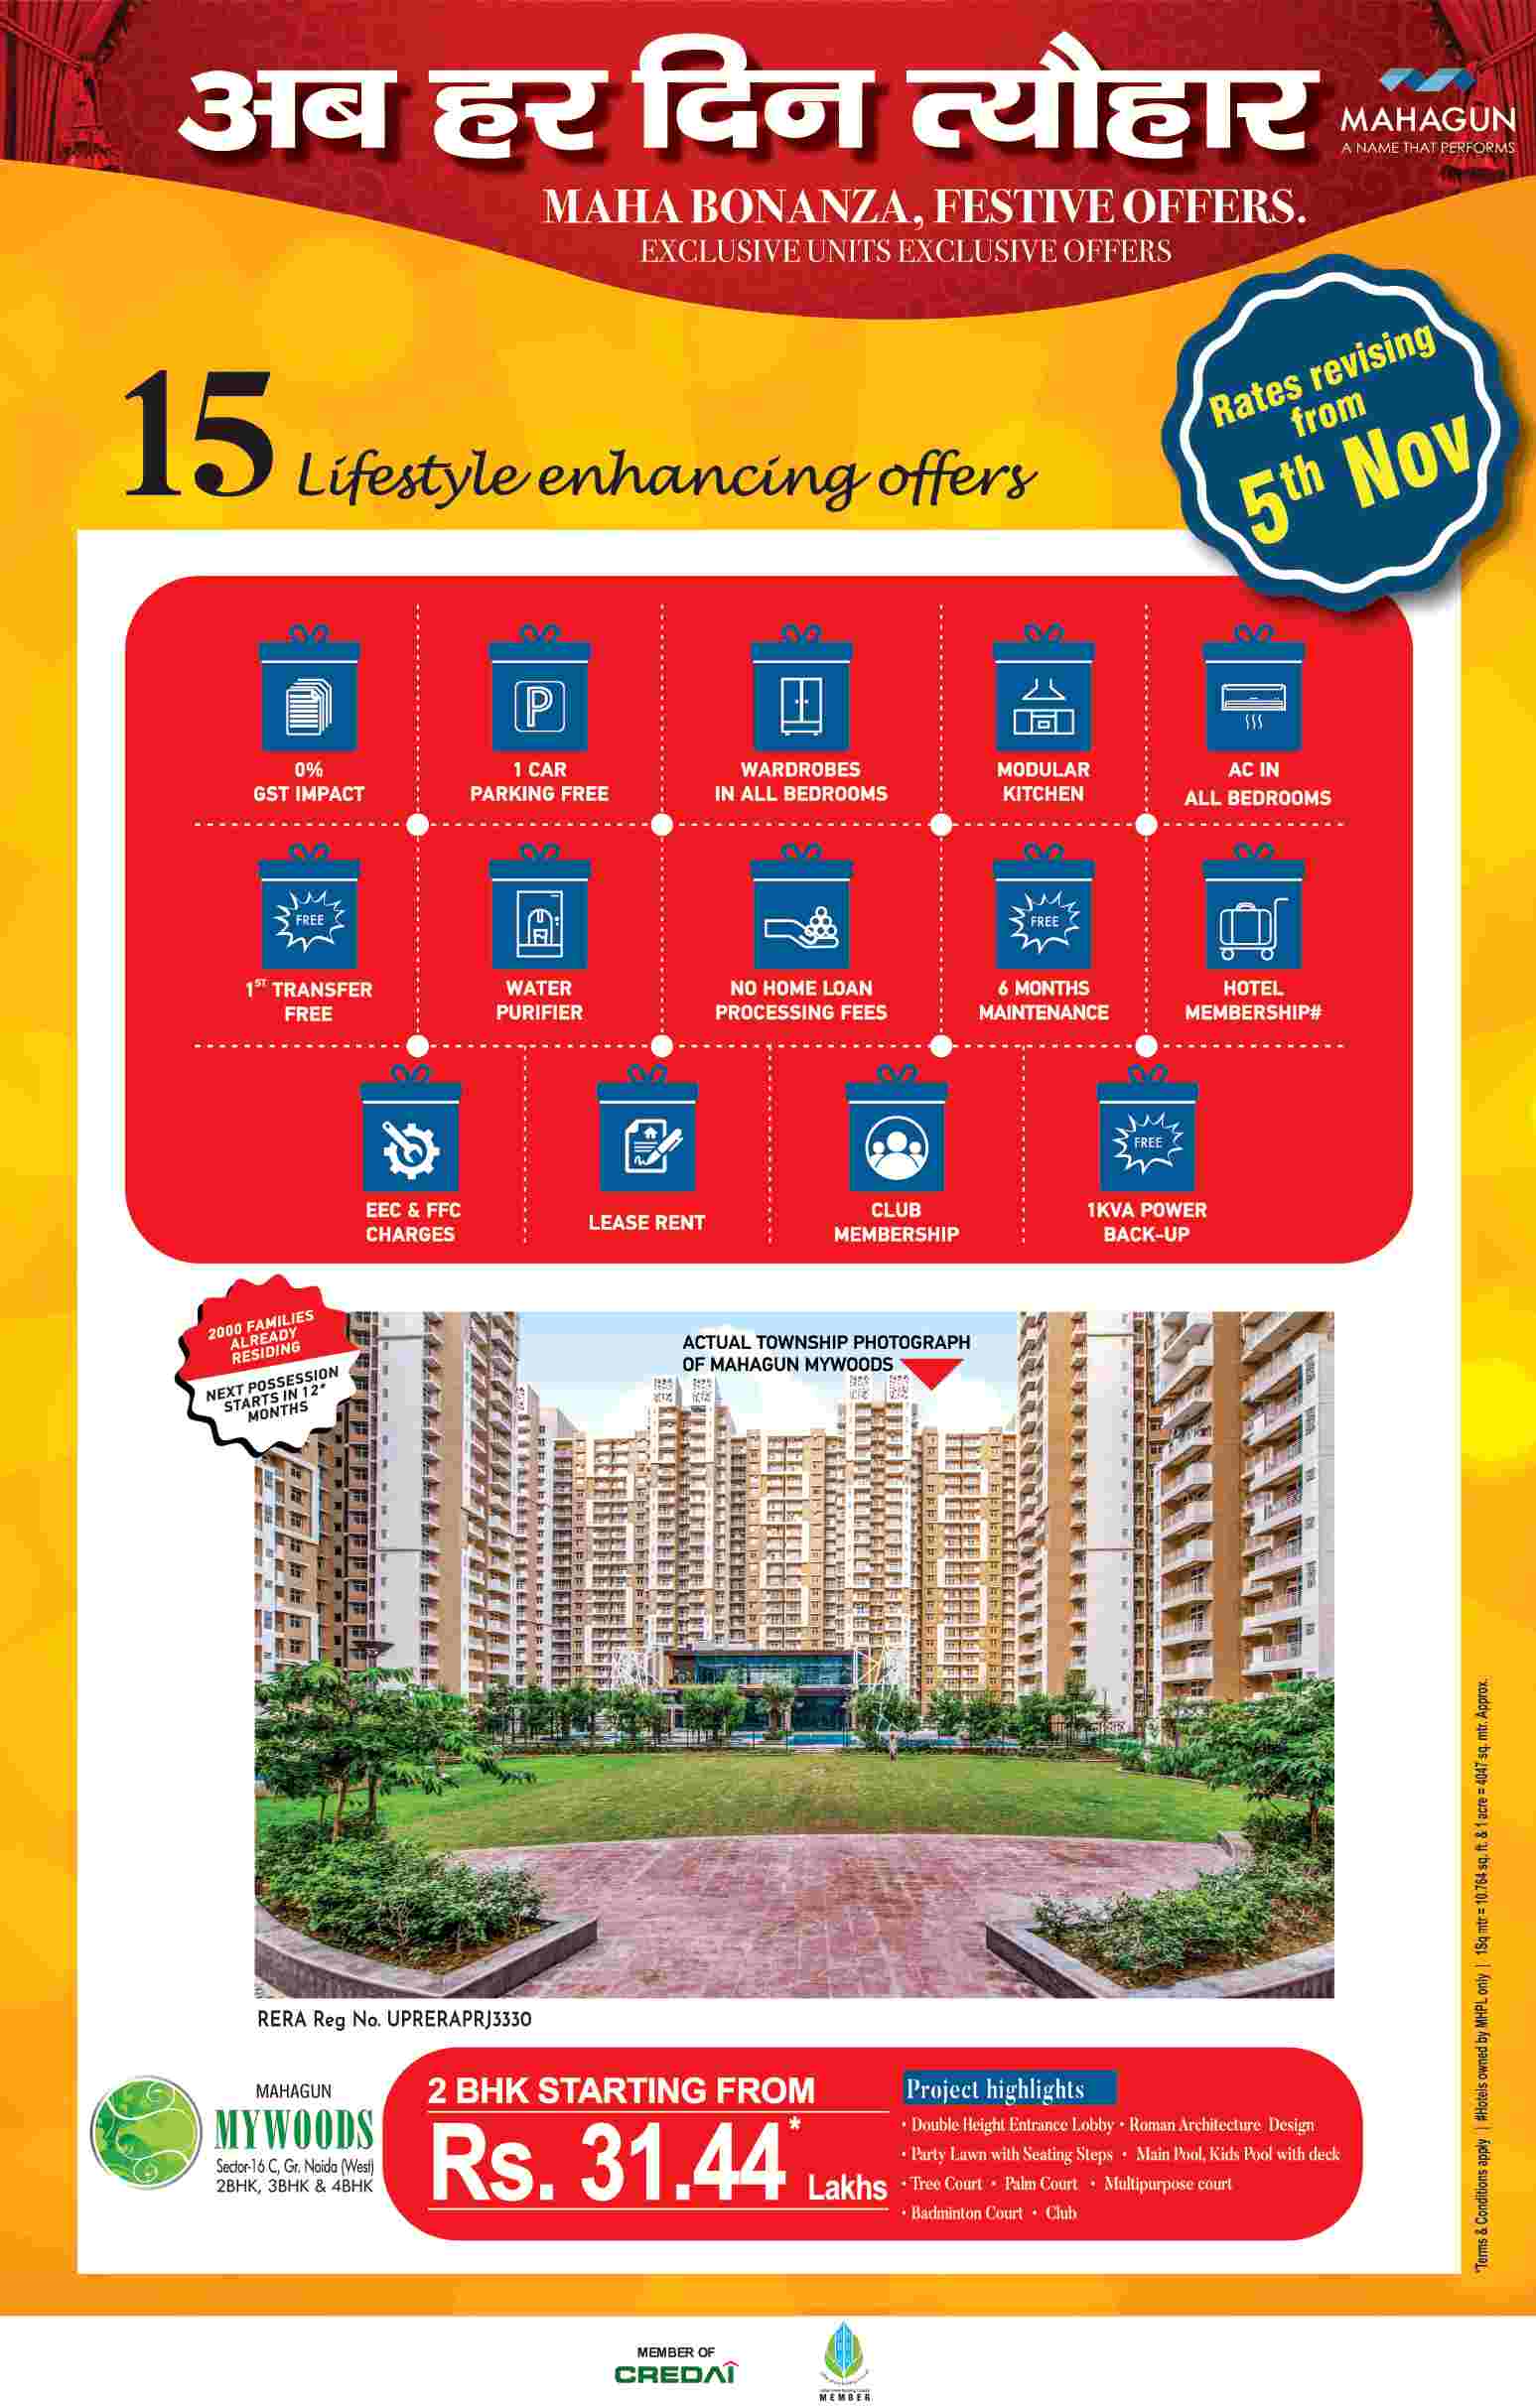 Avail the Maha Bonanza Festive Offers at Mahagun Mywoods in Sector 16C, Greater Noida Update